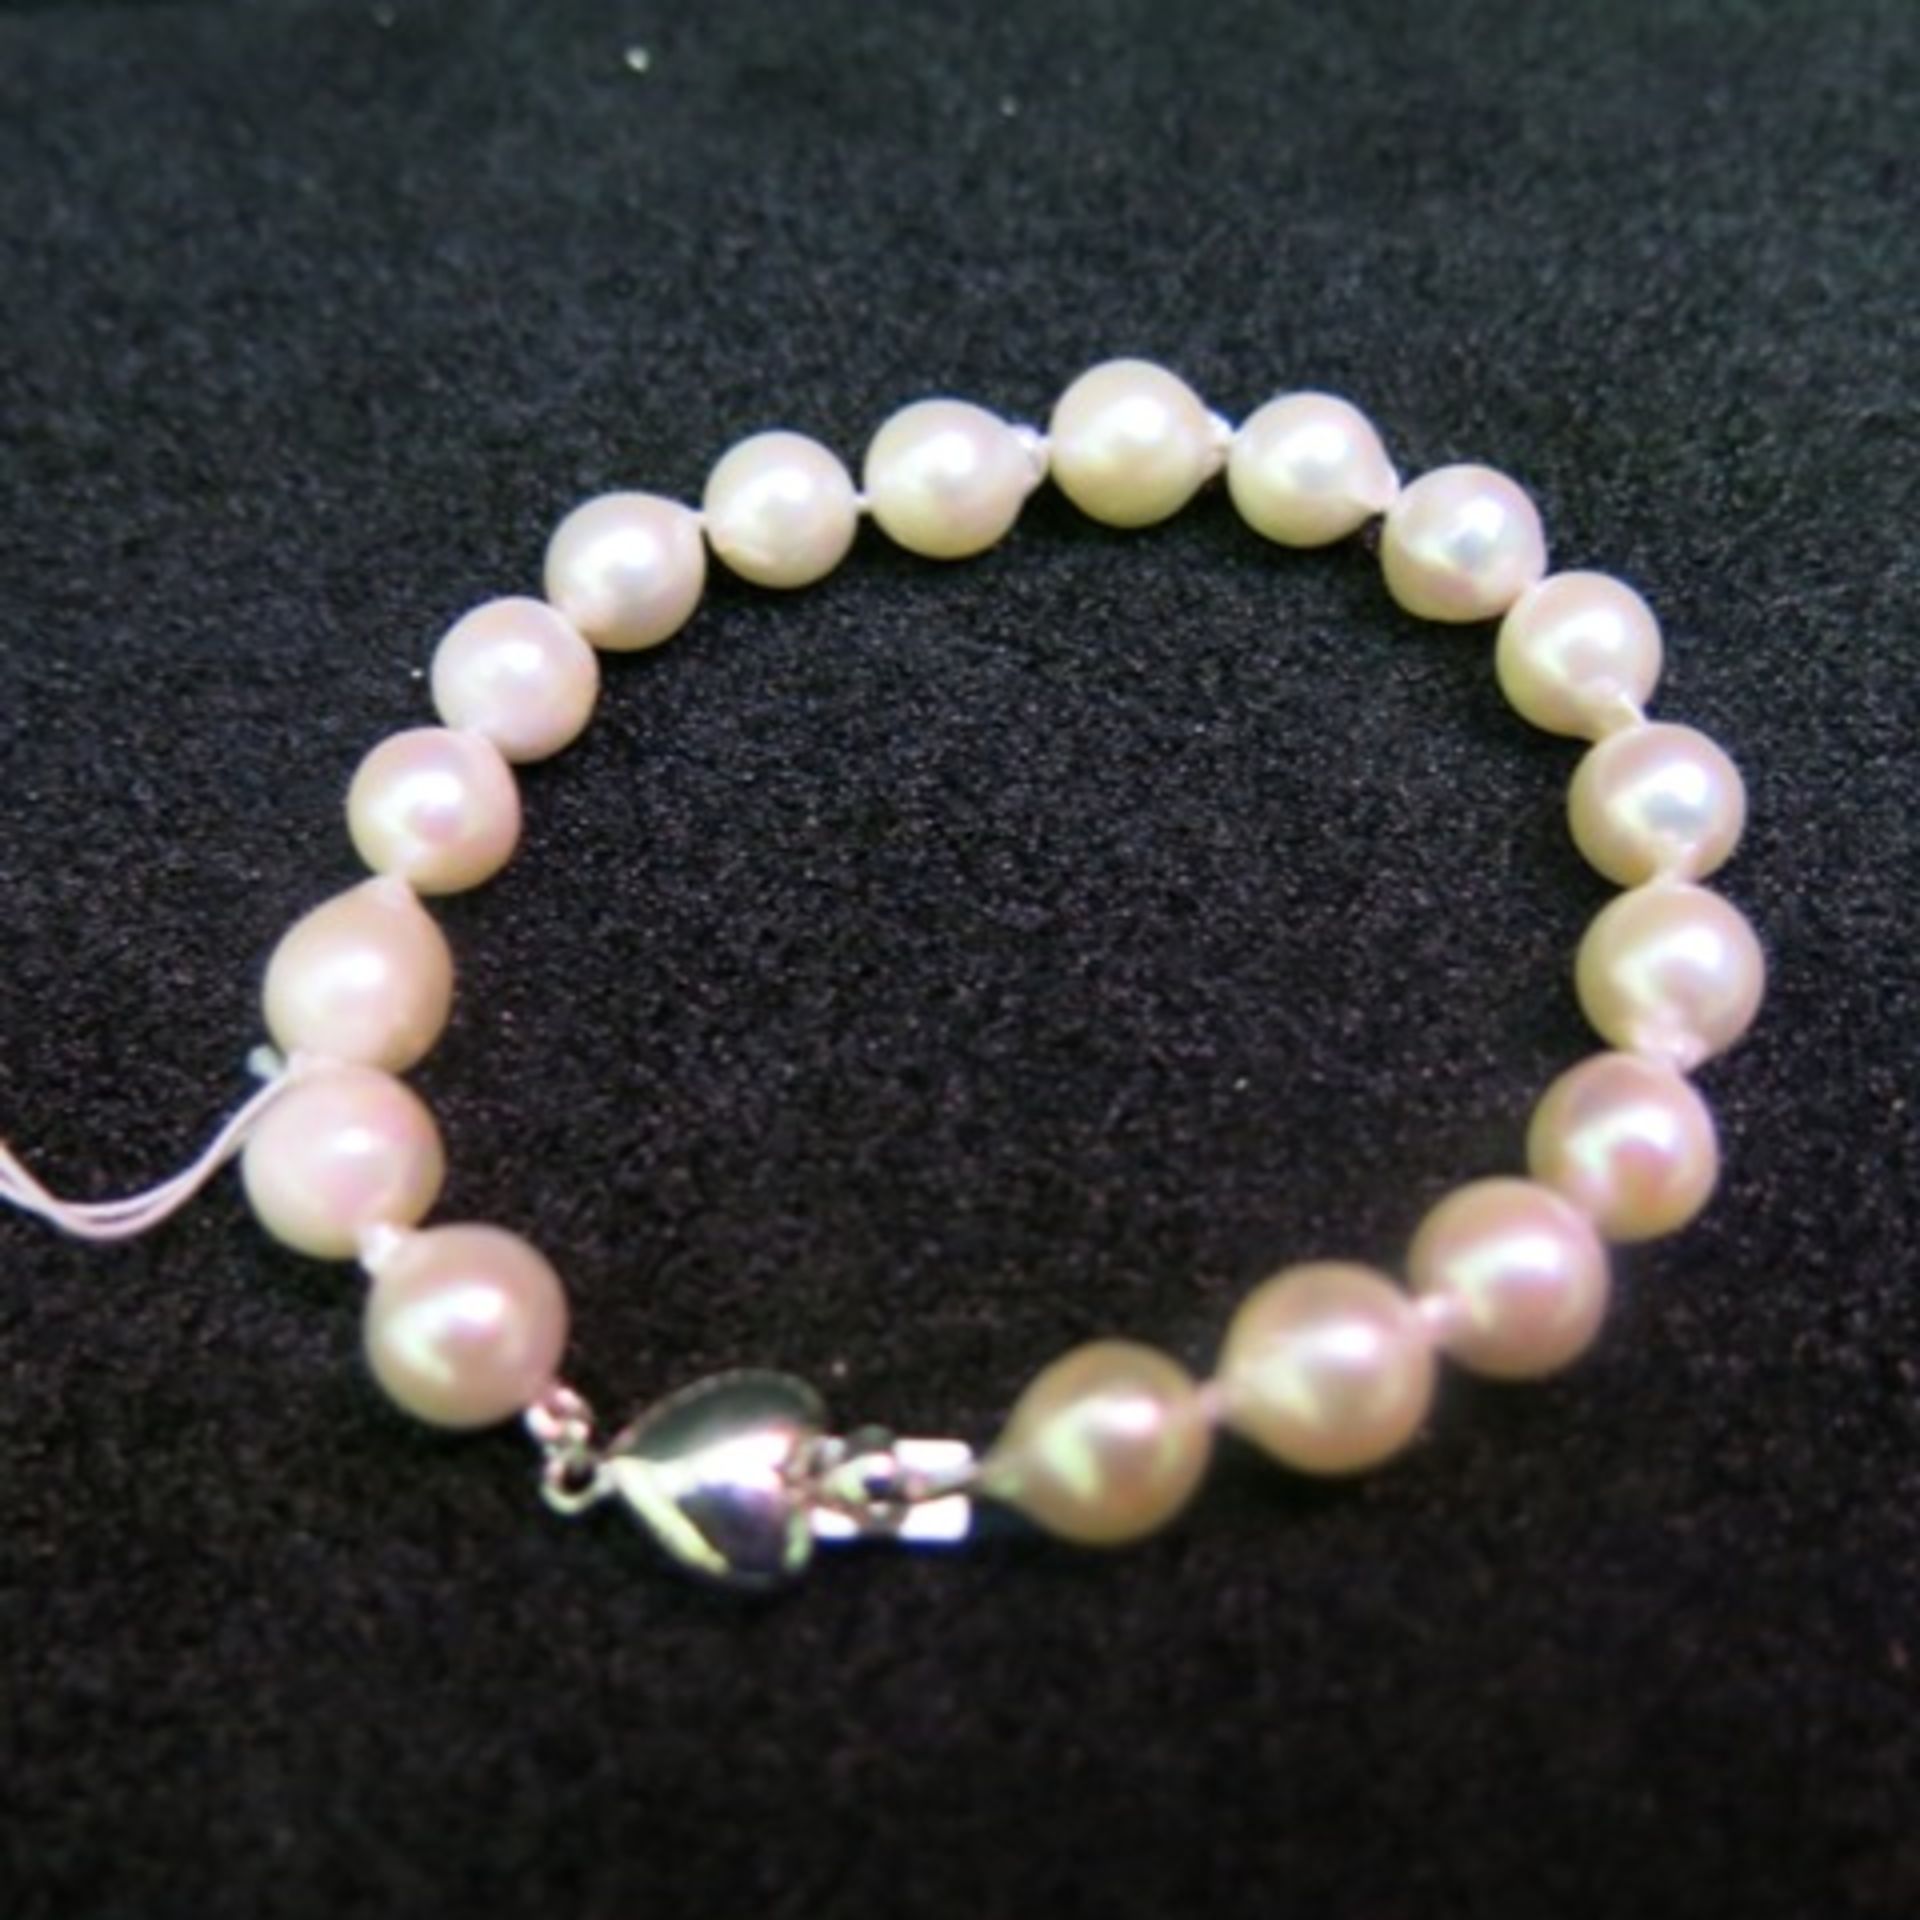 Pearl Bracelet (8mm) with Silver (925) Heart Shaped Clasp in Presentation Case. RRP £258.00 - Image 2 of 5